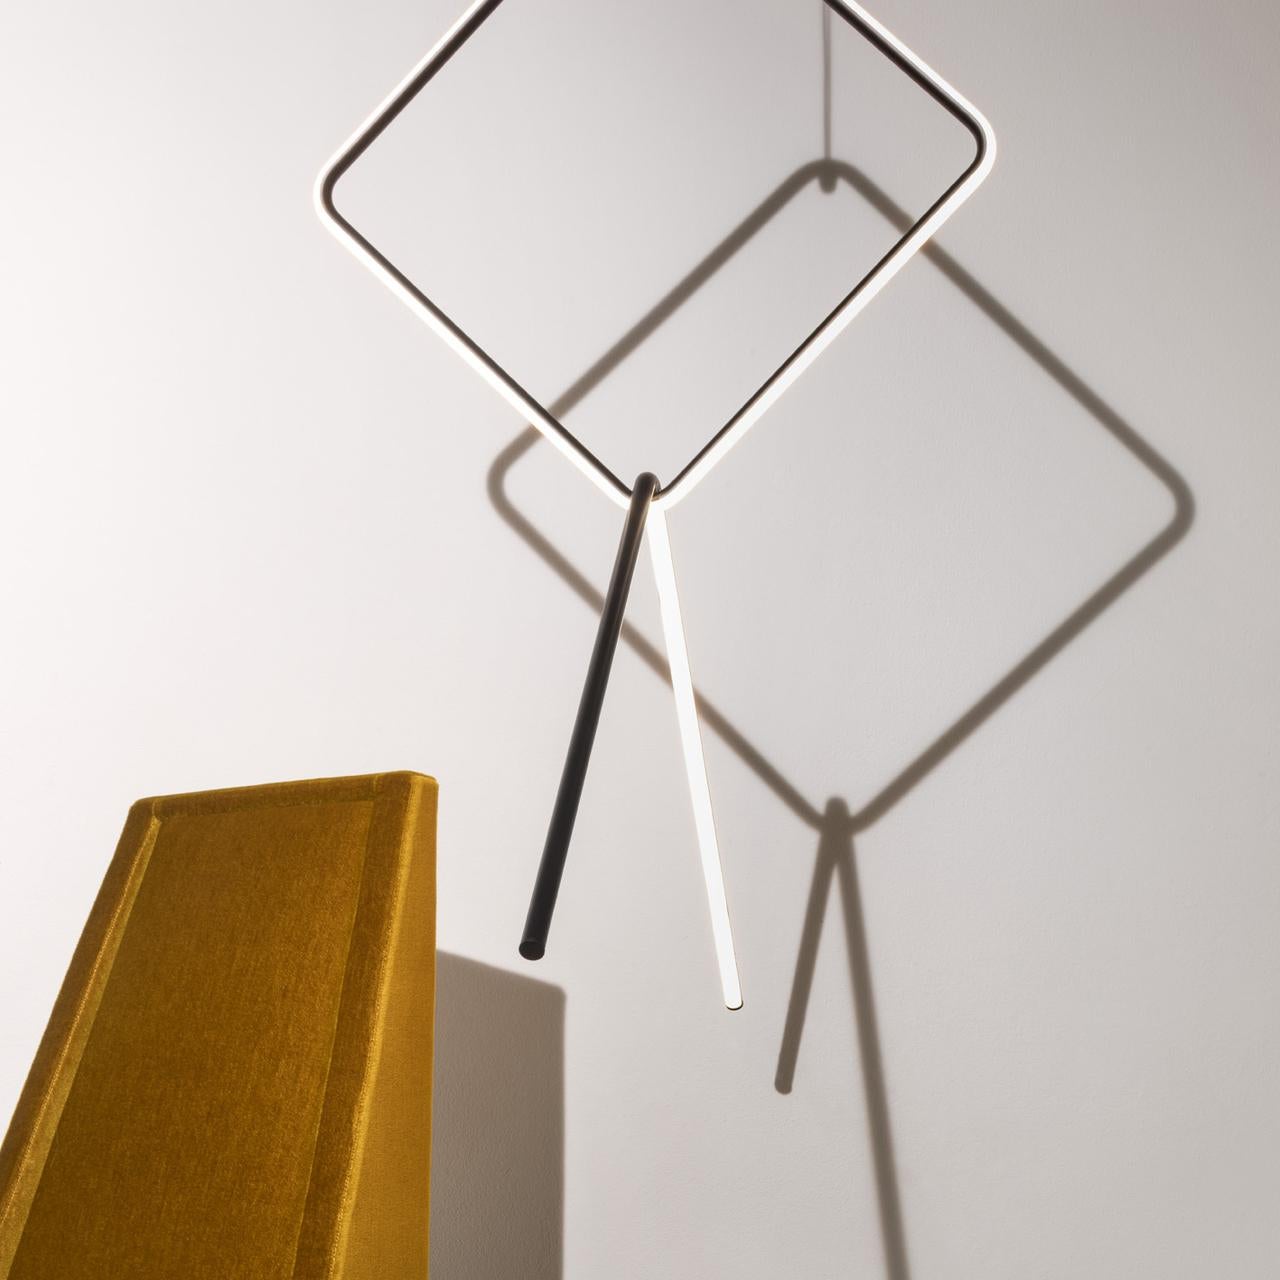 Italian FLOS Small Circle and Square Arrangements Light by Michael Anastassiades For Sale